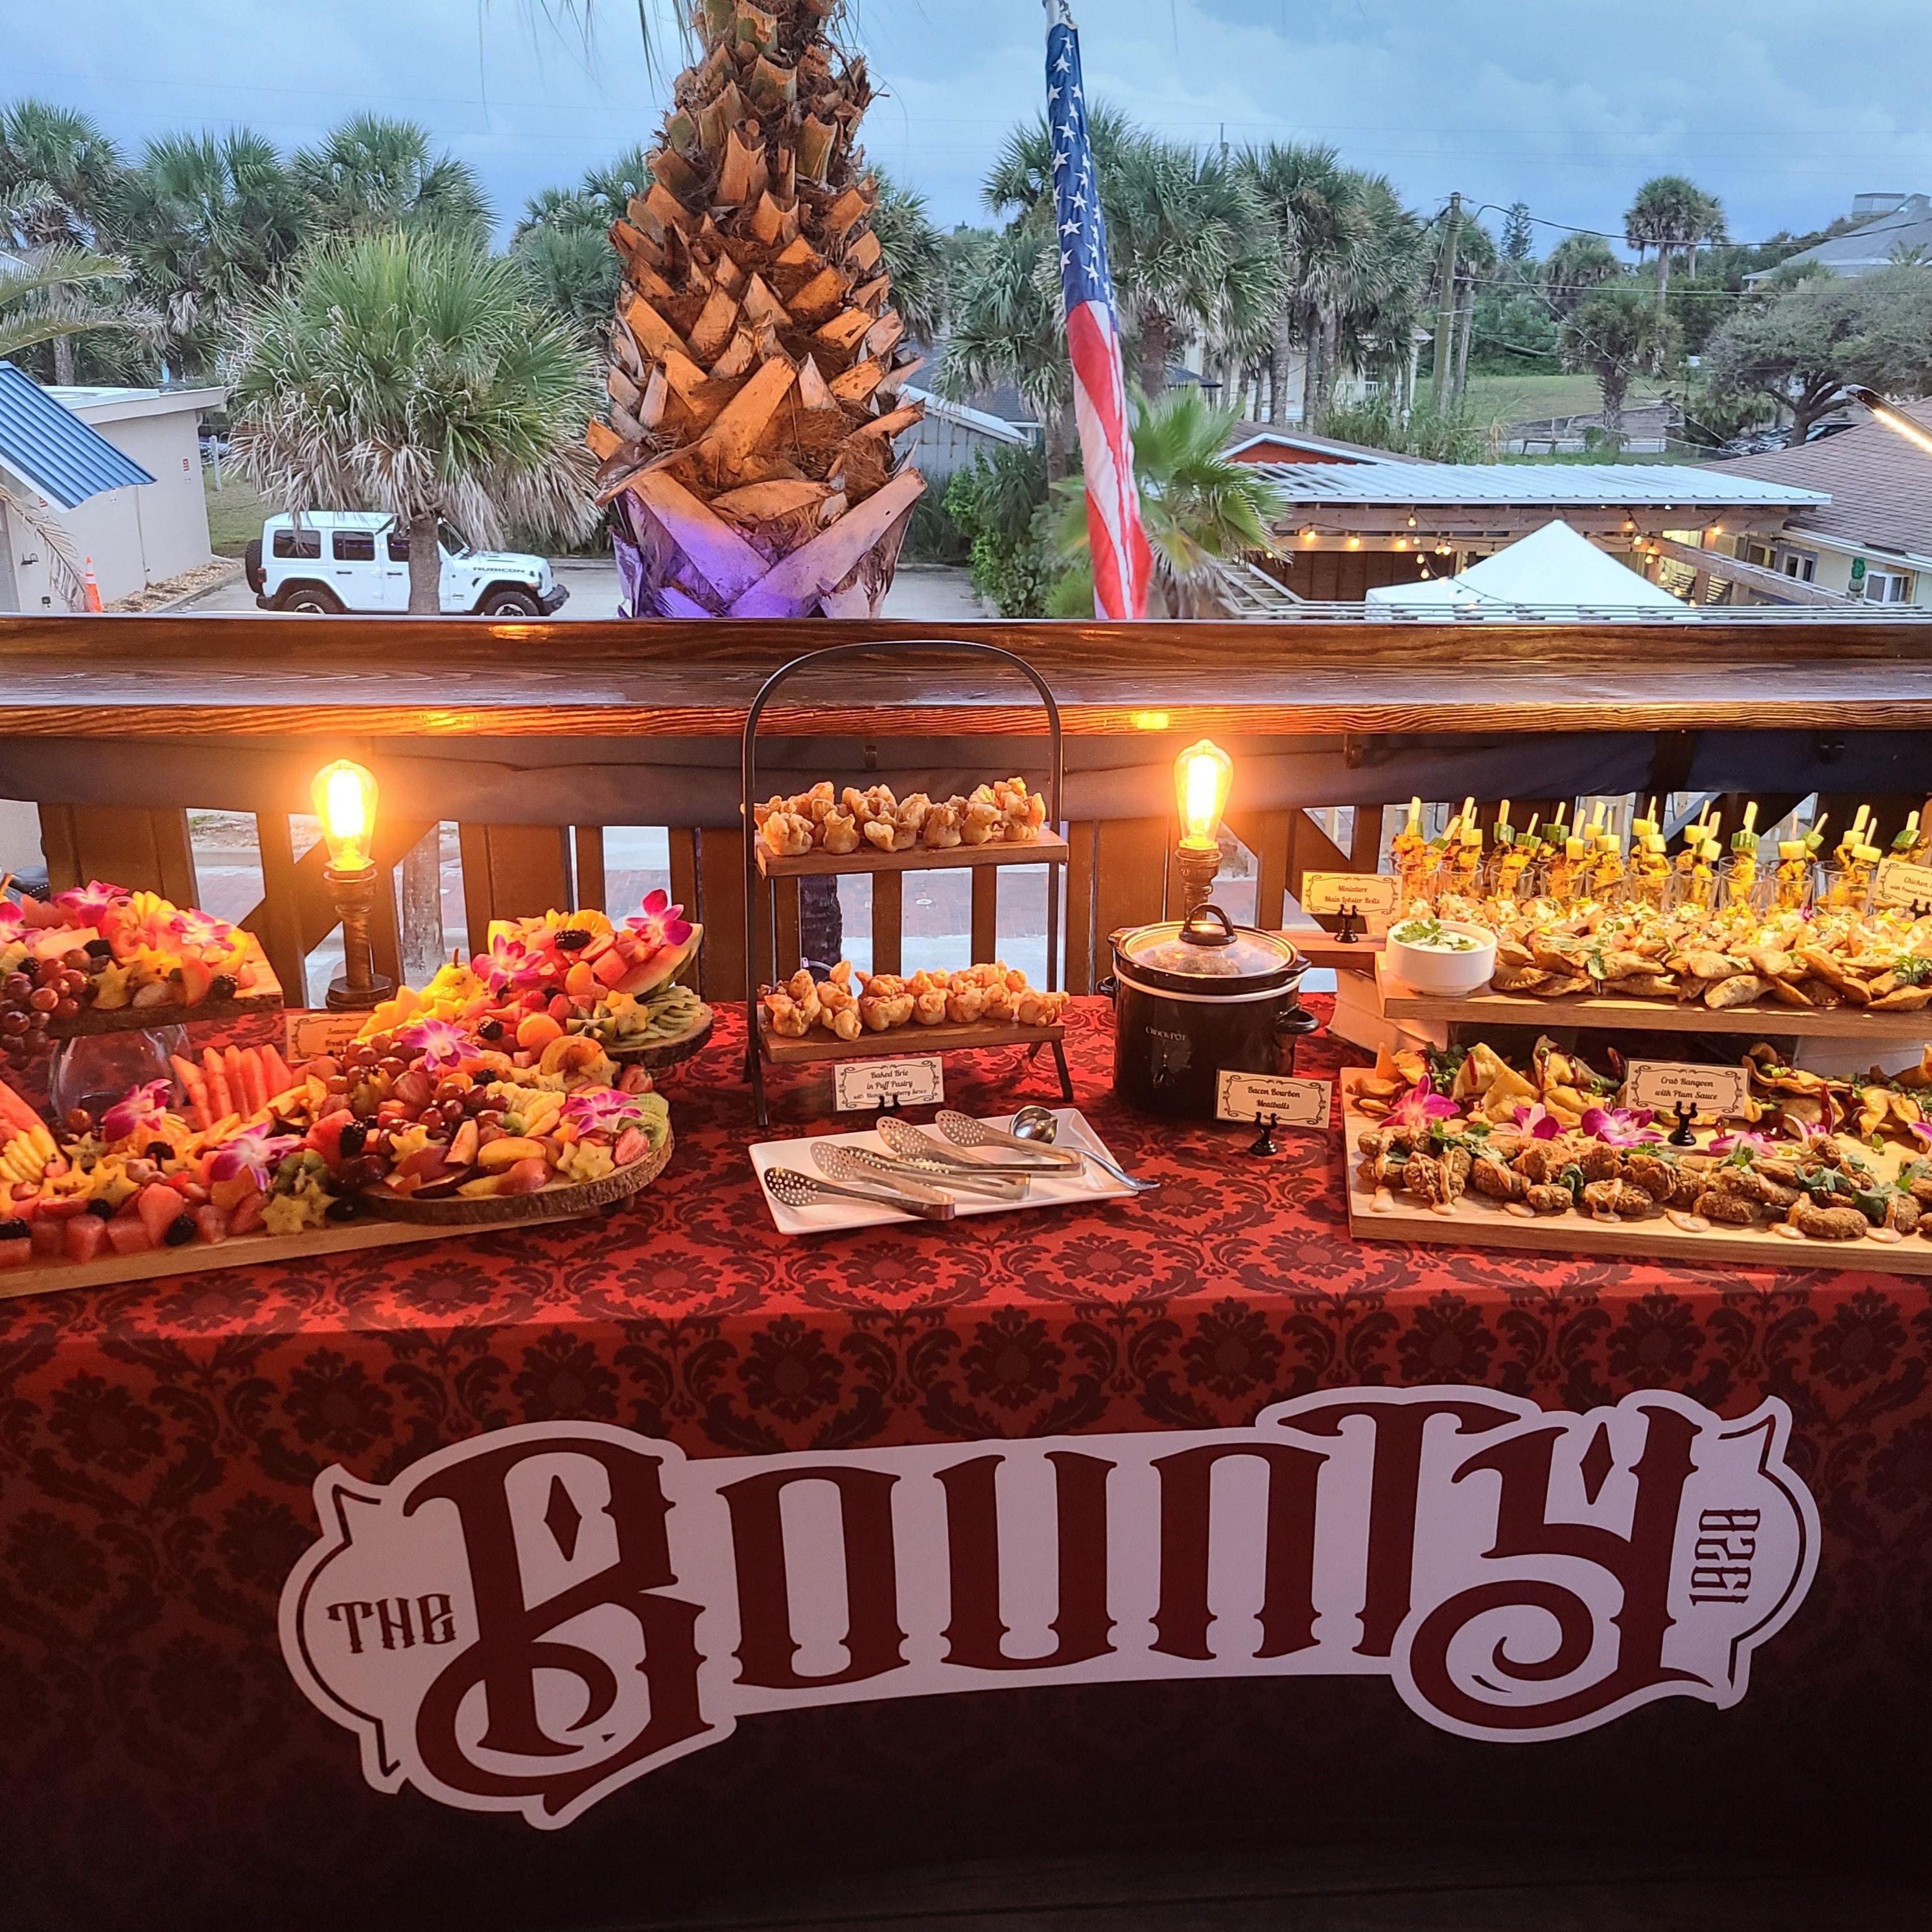 Flagler Tavern offers private event space with a full catering menu